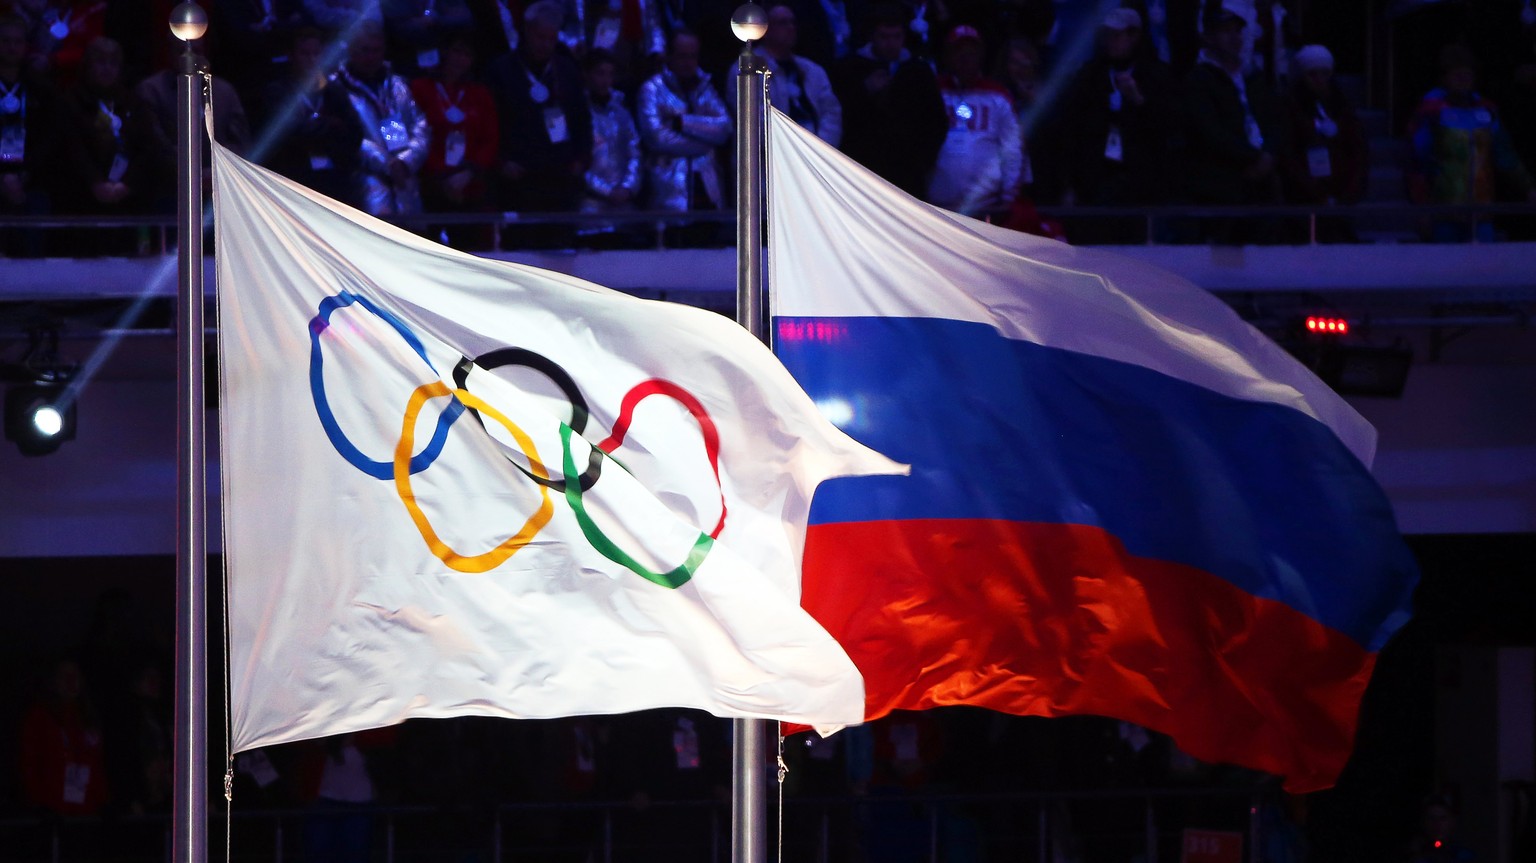 epa06369455 (FILE) - The Olympic flag (L) and the Russian flag (R) during the Closing Ceremony of the Sochi 2014 Olympic Games in the Fisht Olympic Stadium in Sochi, Russia, 23 February 2014 (reissued ...